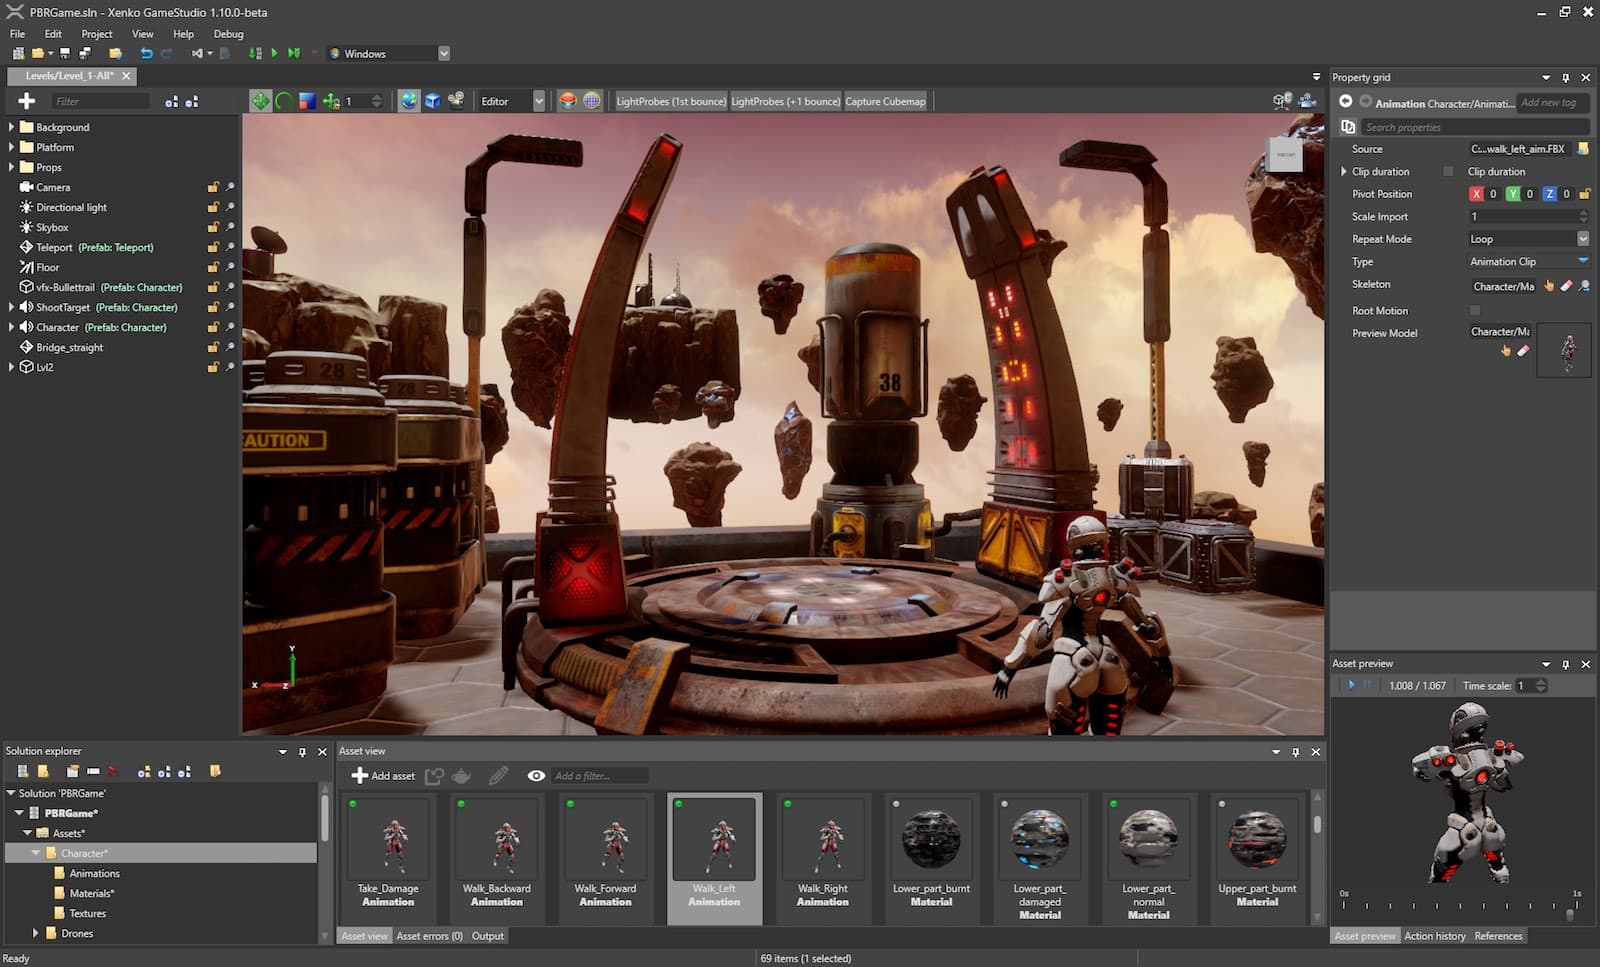 Silicon Studio GDC2017 Game engine Xenko to announce official release,  Special co-promotion with MSI (Japan) and PearlAbyss Corp. (S. Korea) for  YEBIS